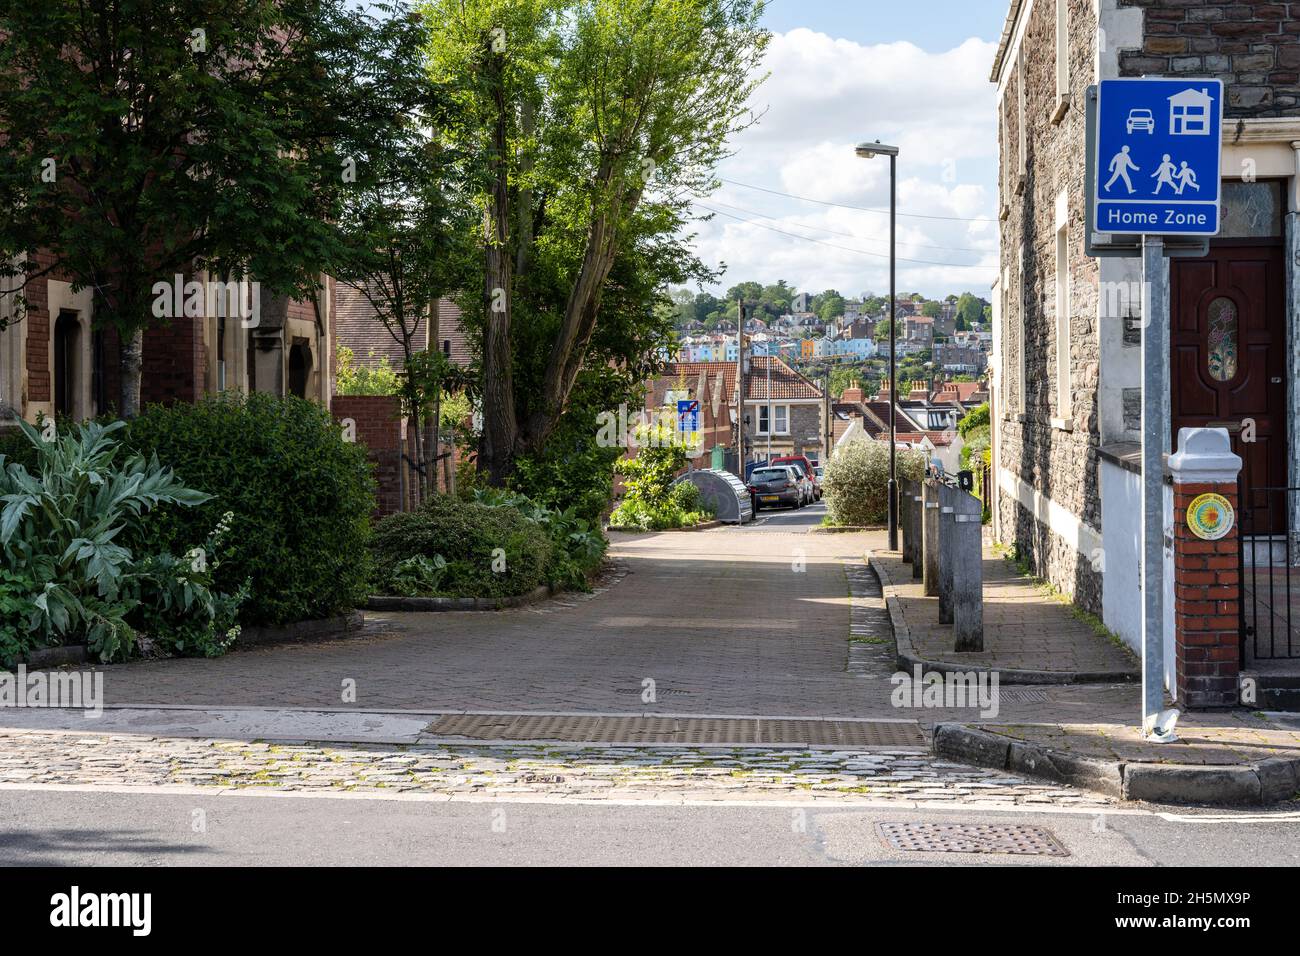 Street trees and shrubs contribute to traffic calming and climate resilience in a 'home zone' residential street in Bristol. Stock Photo